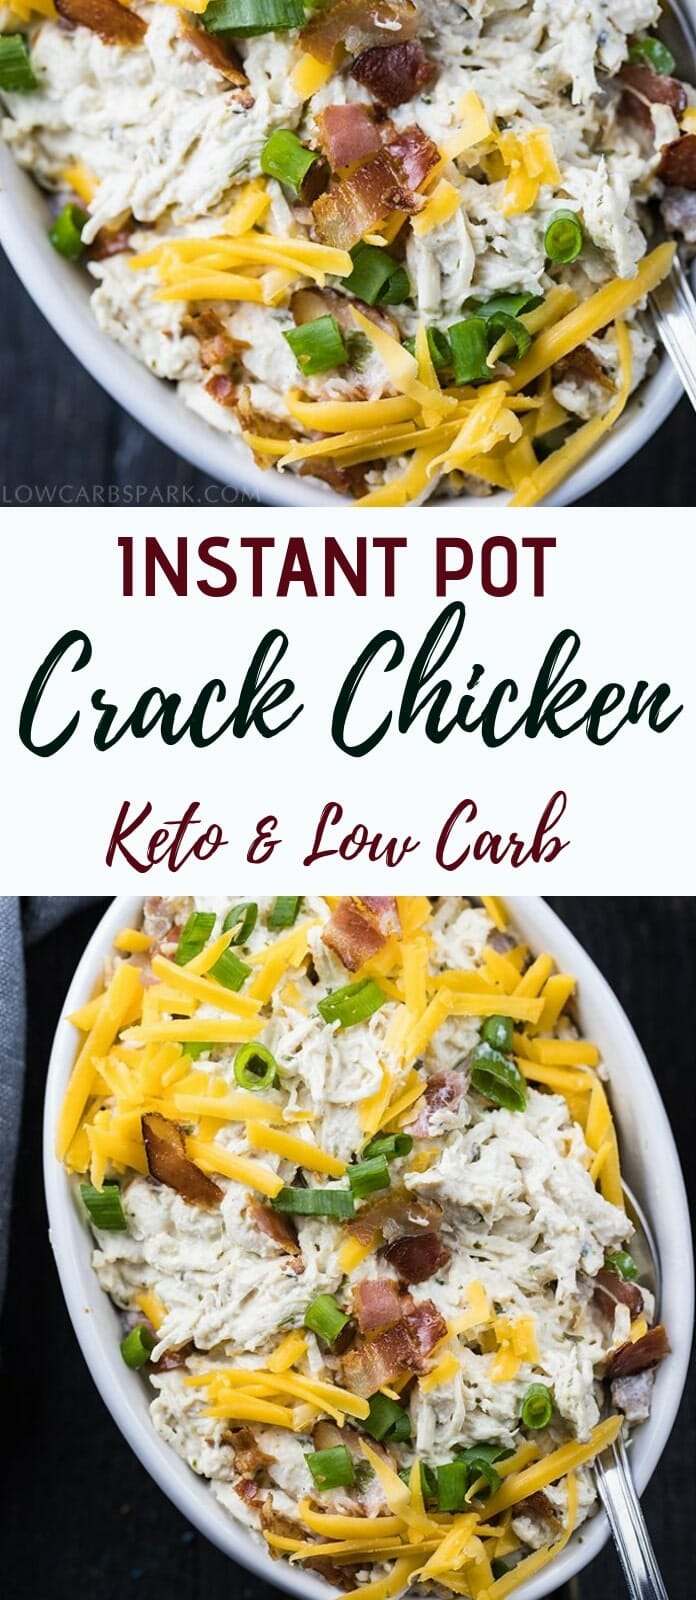 Easy Crack Chicken Recipe - Instant Pot or Slow Cooker - Keto Low-Carb